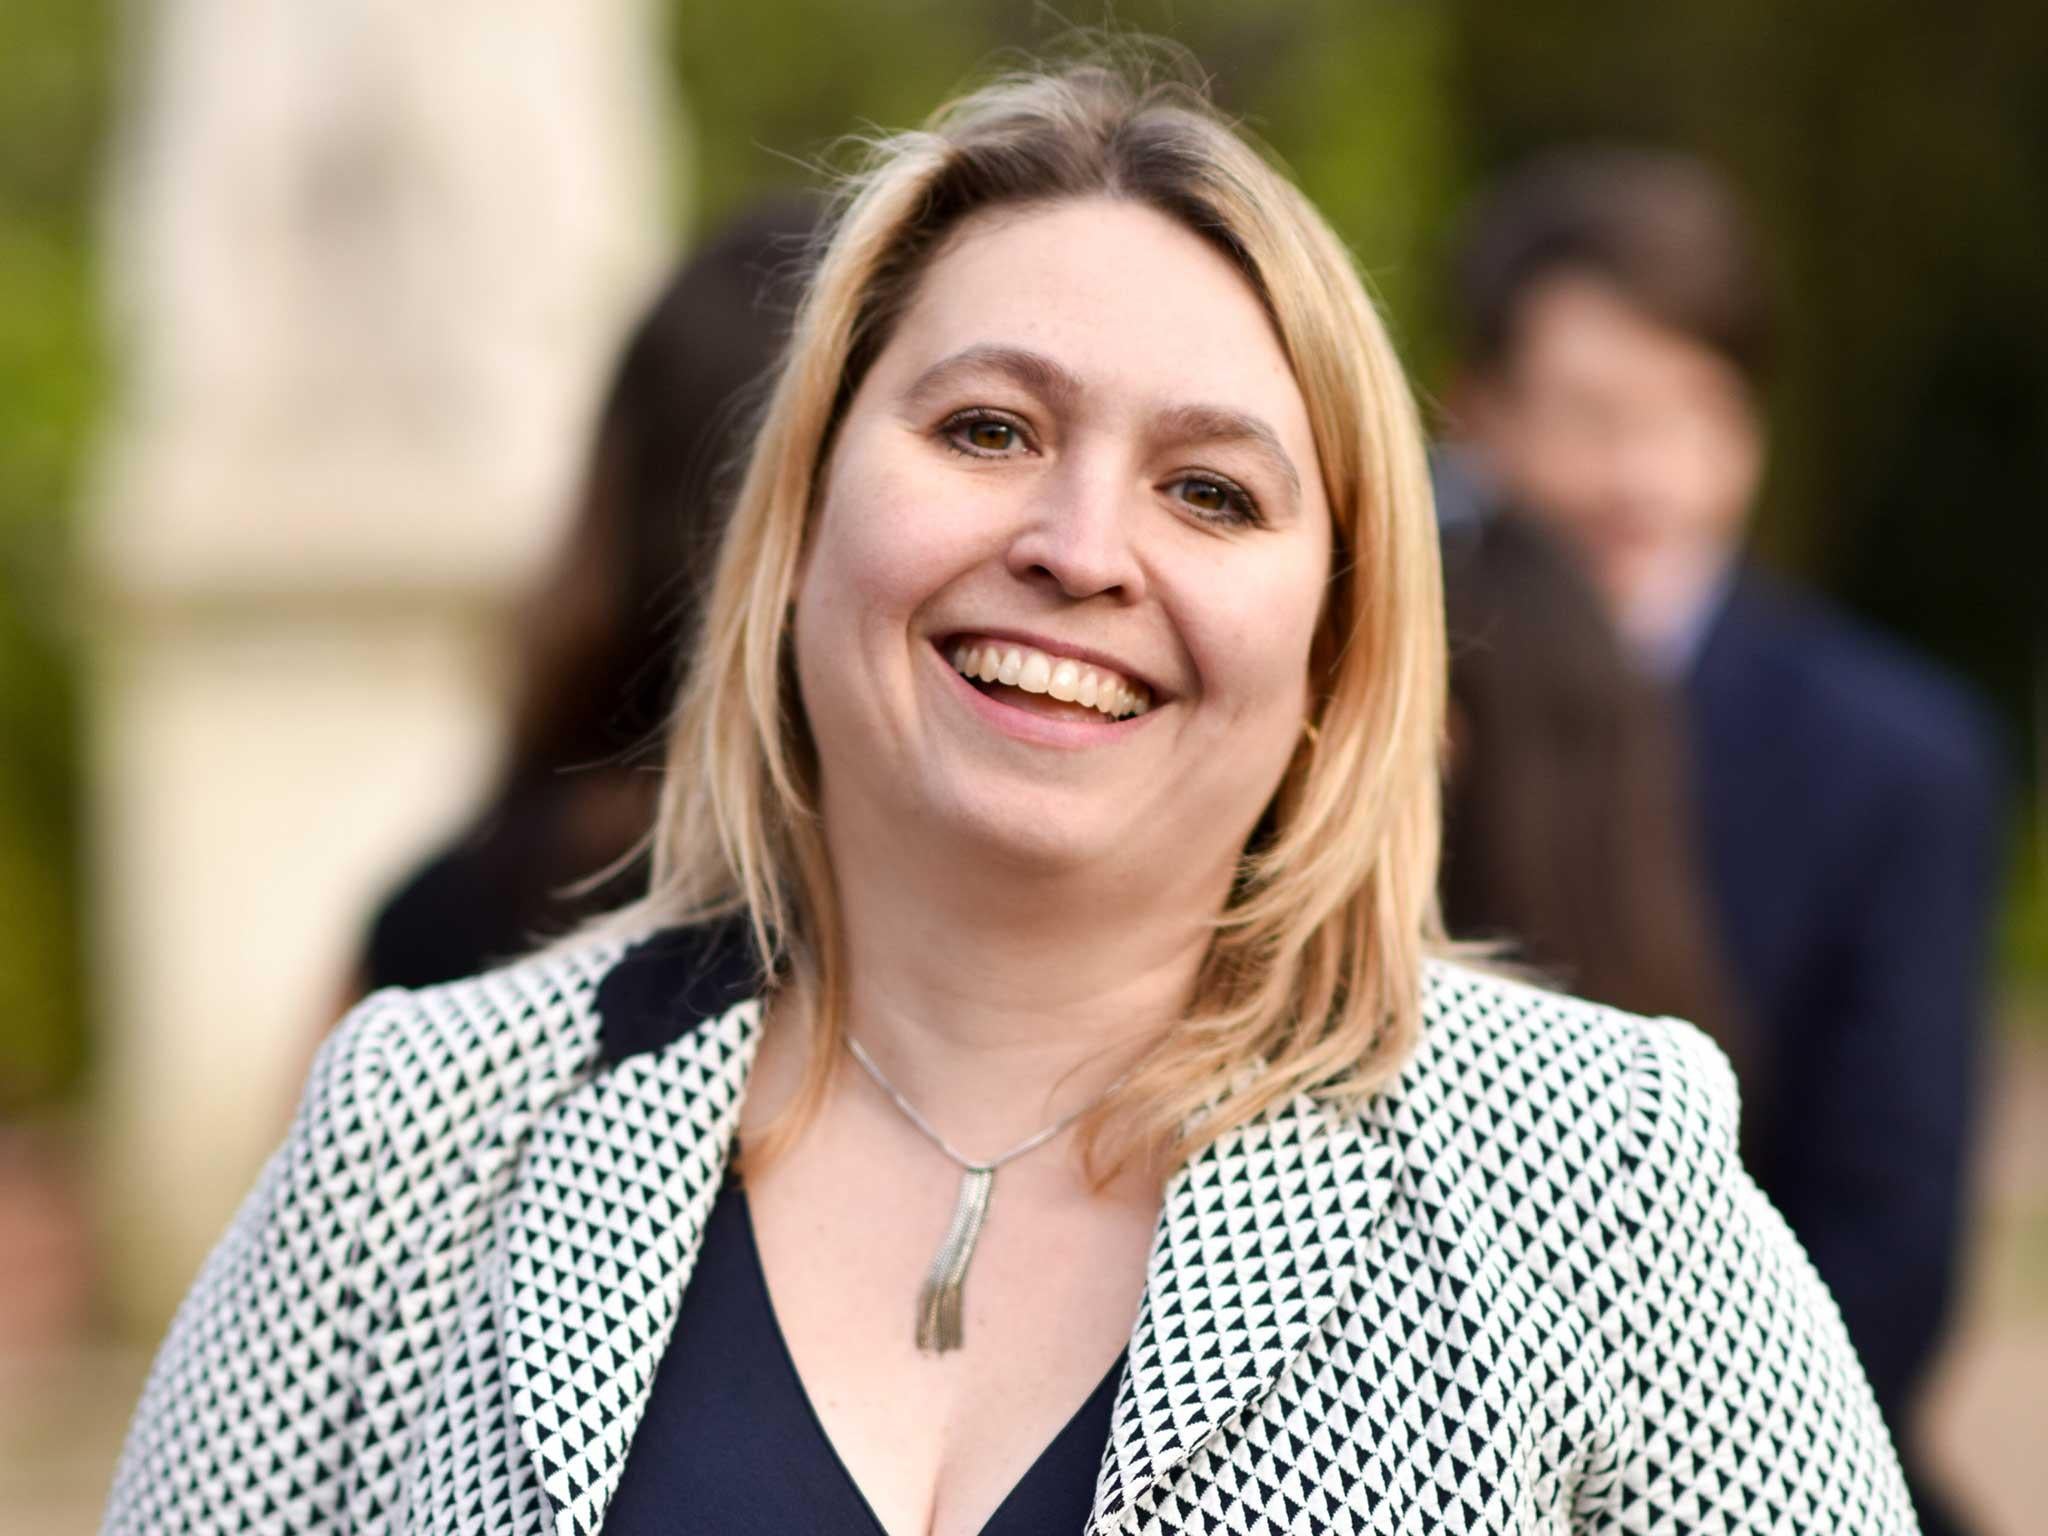 Culture Secretary Karen Bradley said the plan ‘is a further sign of our commitment to build a country that works for everyone’